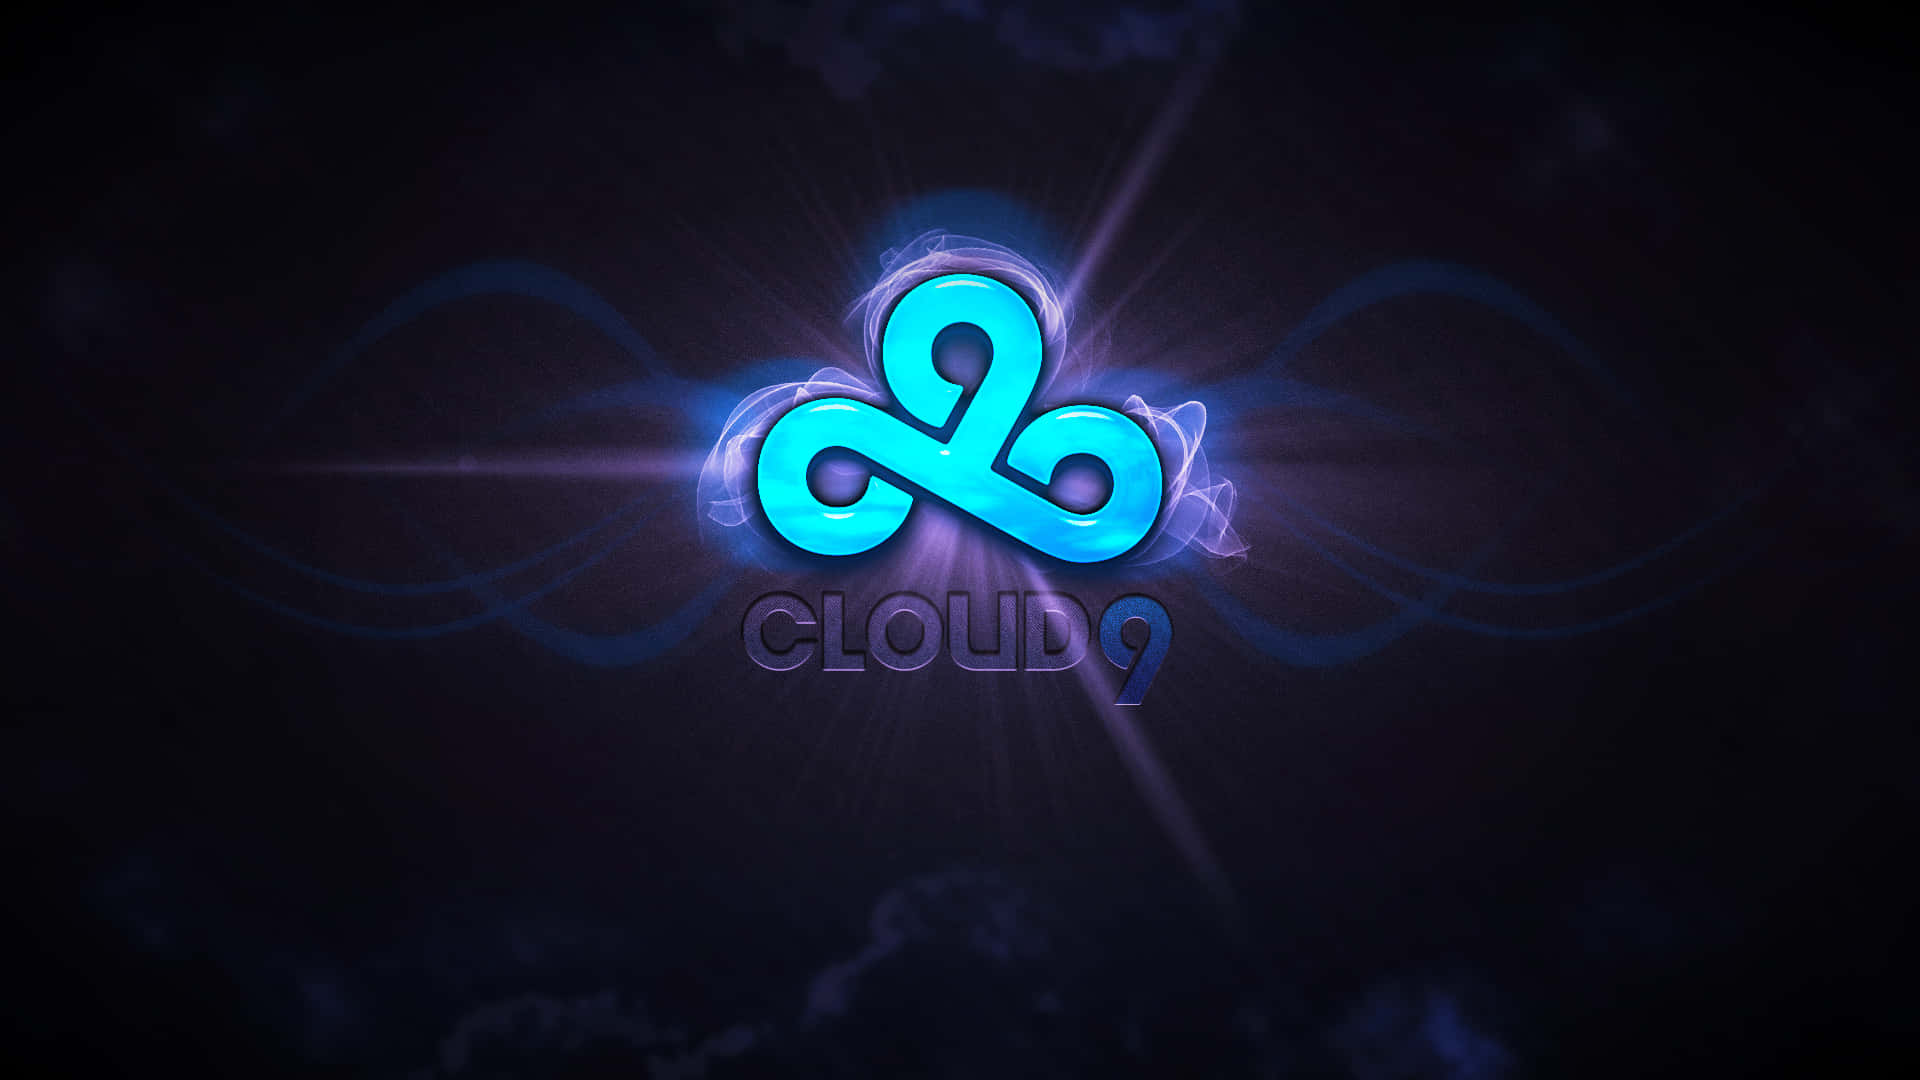 Discover the beauty of Cloud 9 Wallpaper